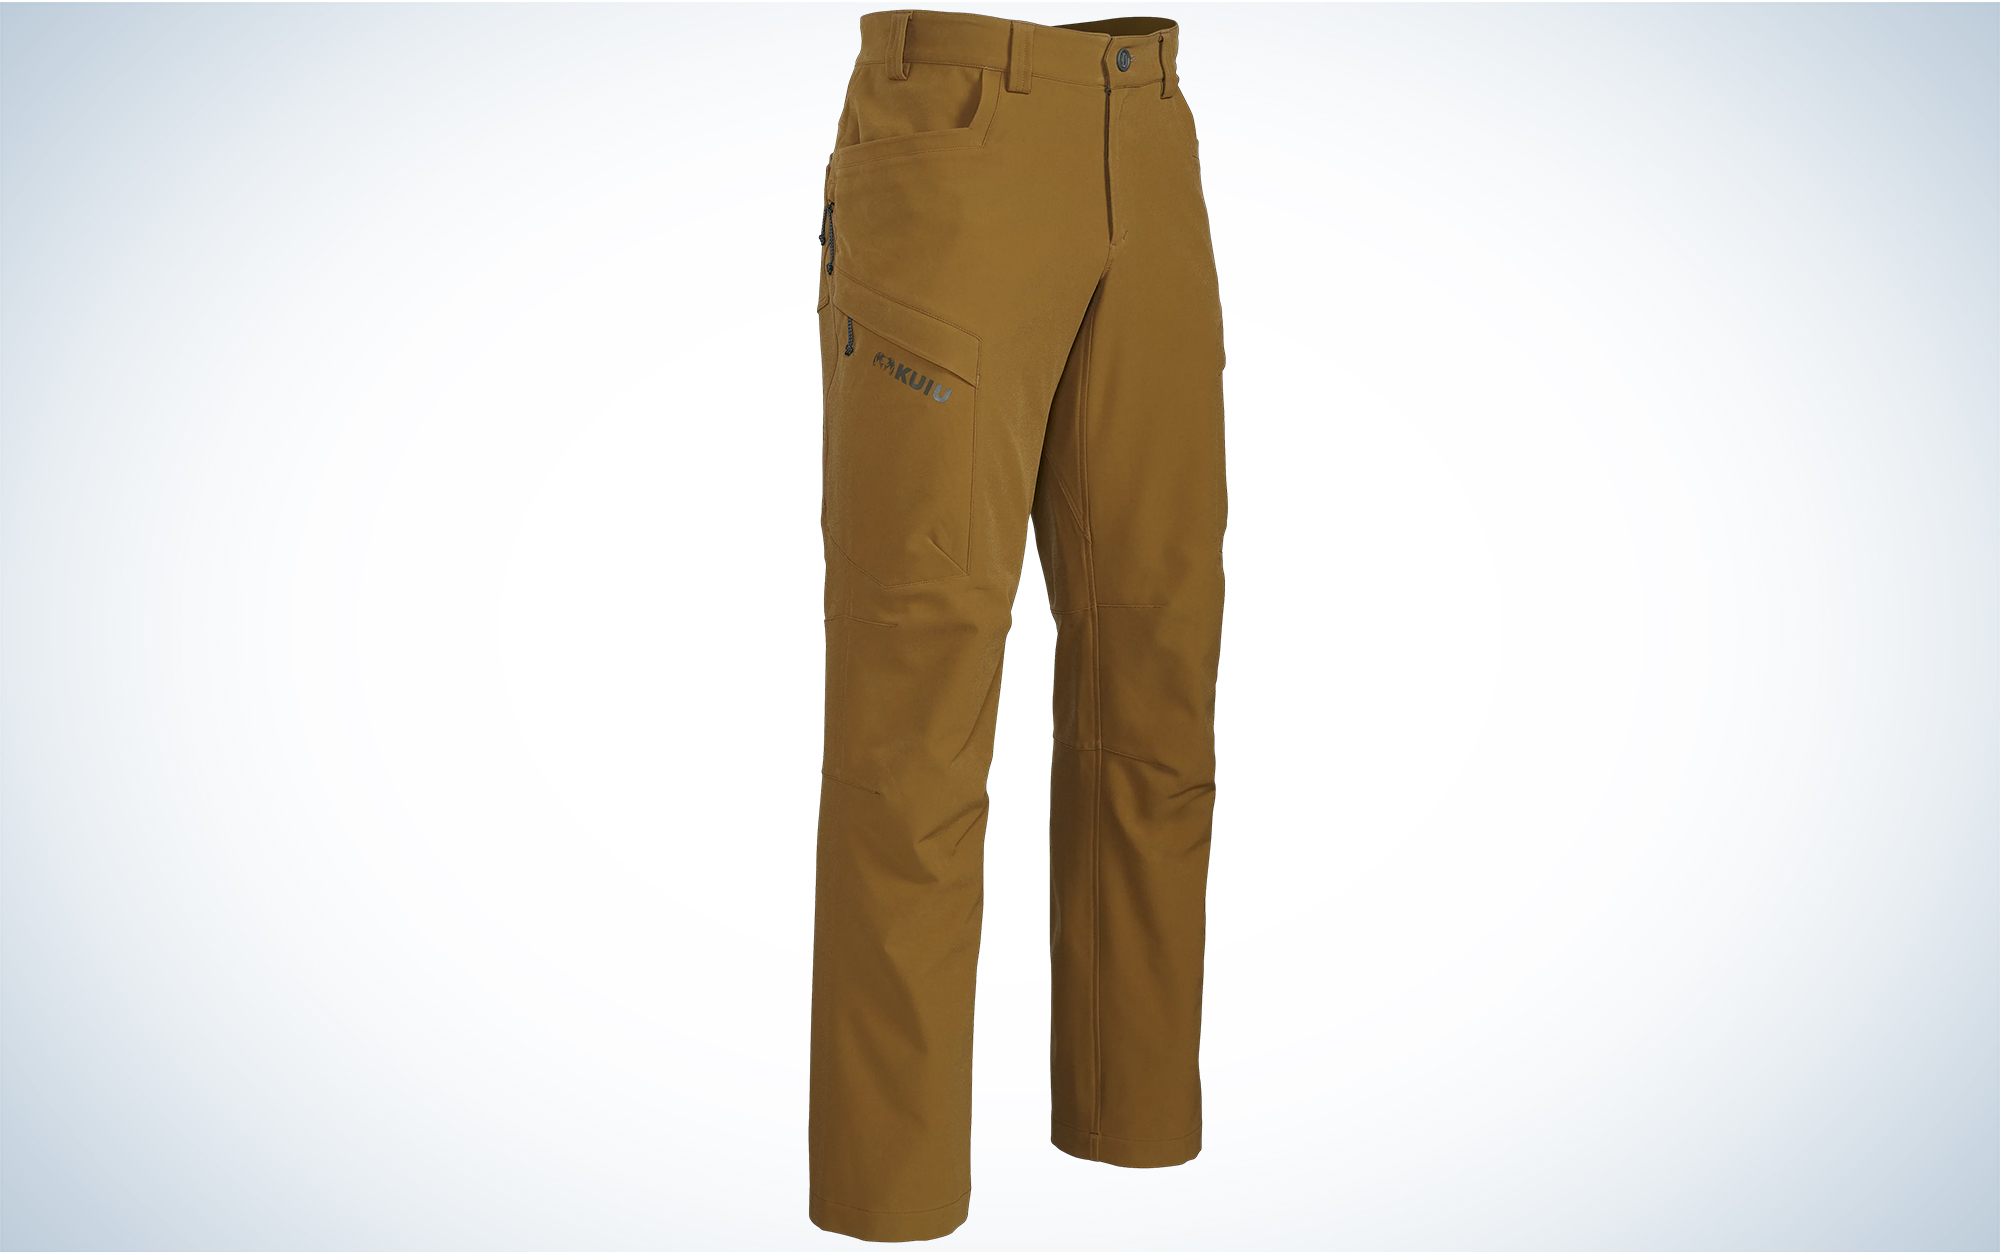 Stay Active in Cold Weather Men's Ultralight Puffer Pants for Winter Hiking  | eBay